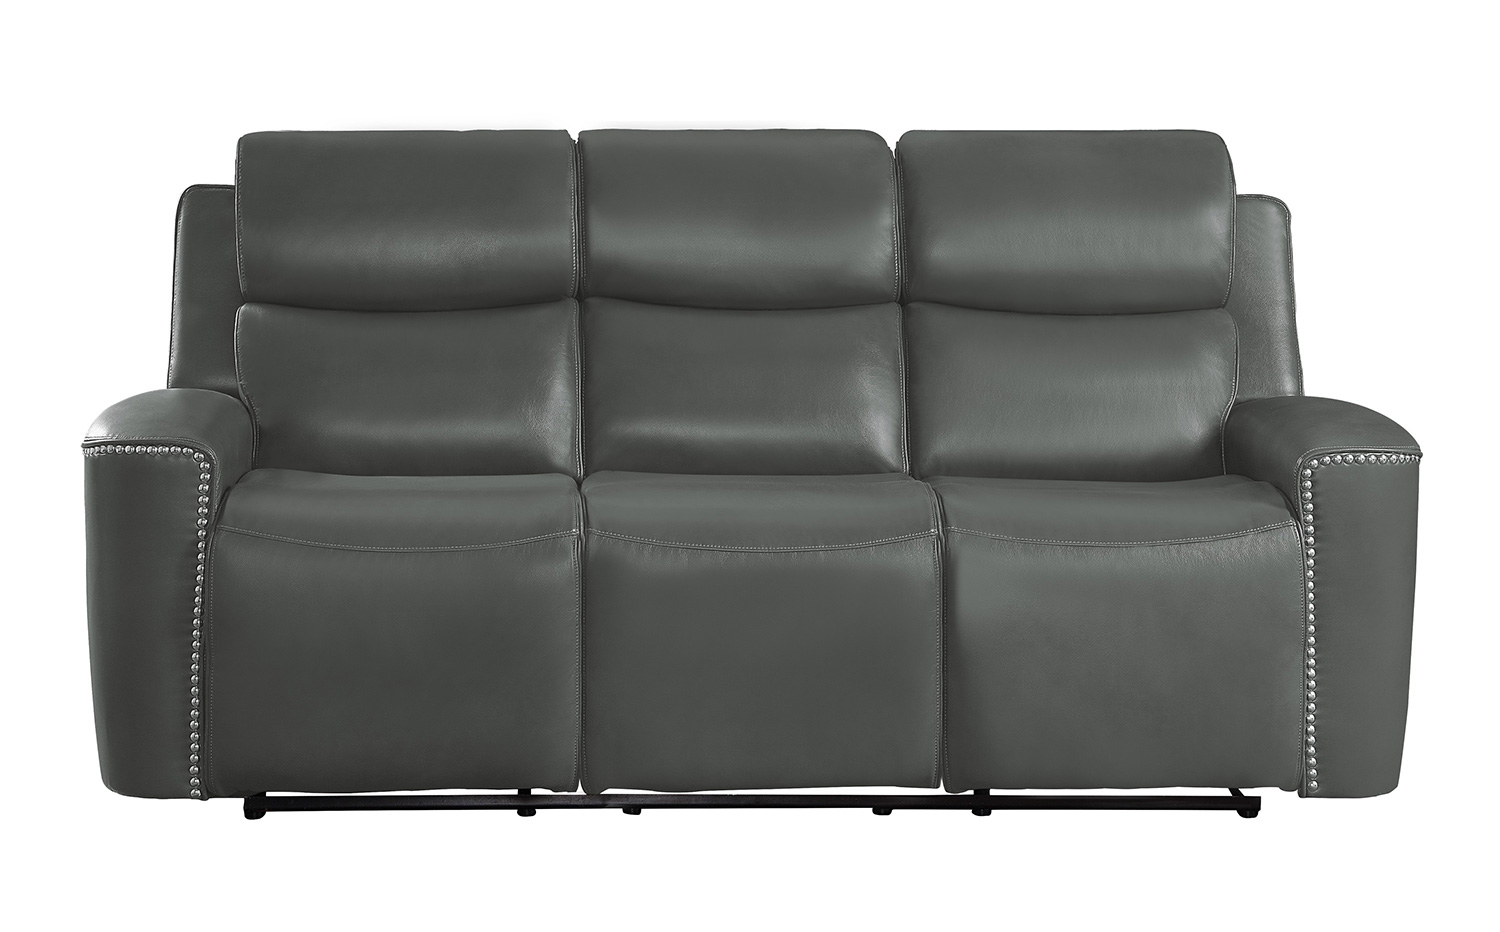 Homelegance Altair Double Reclining Sofa - Gray